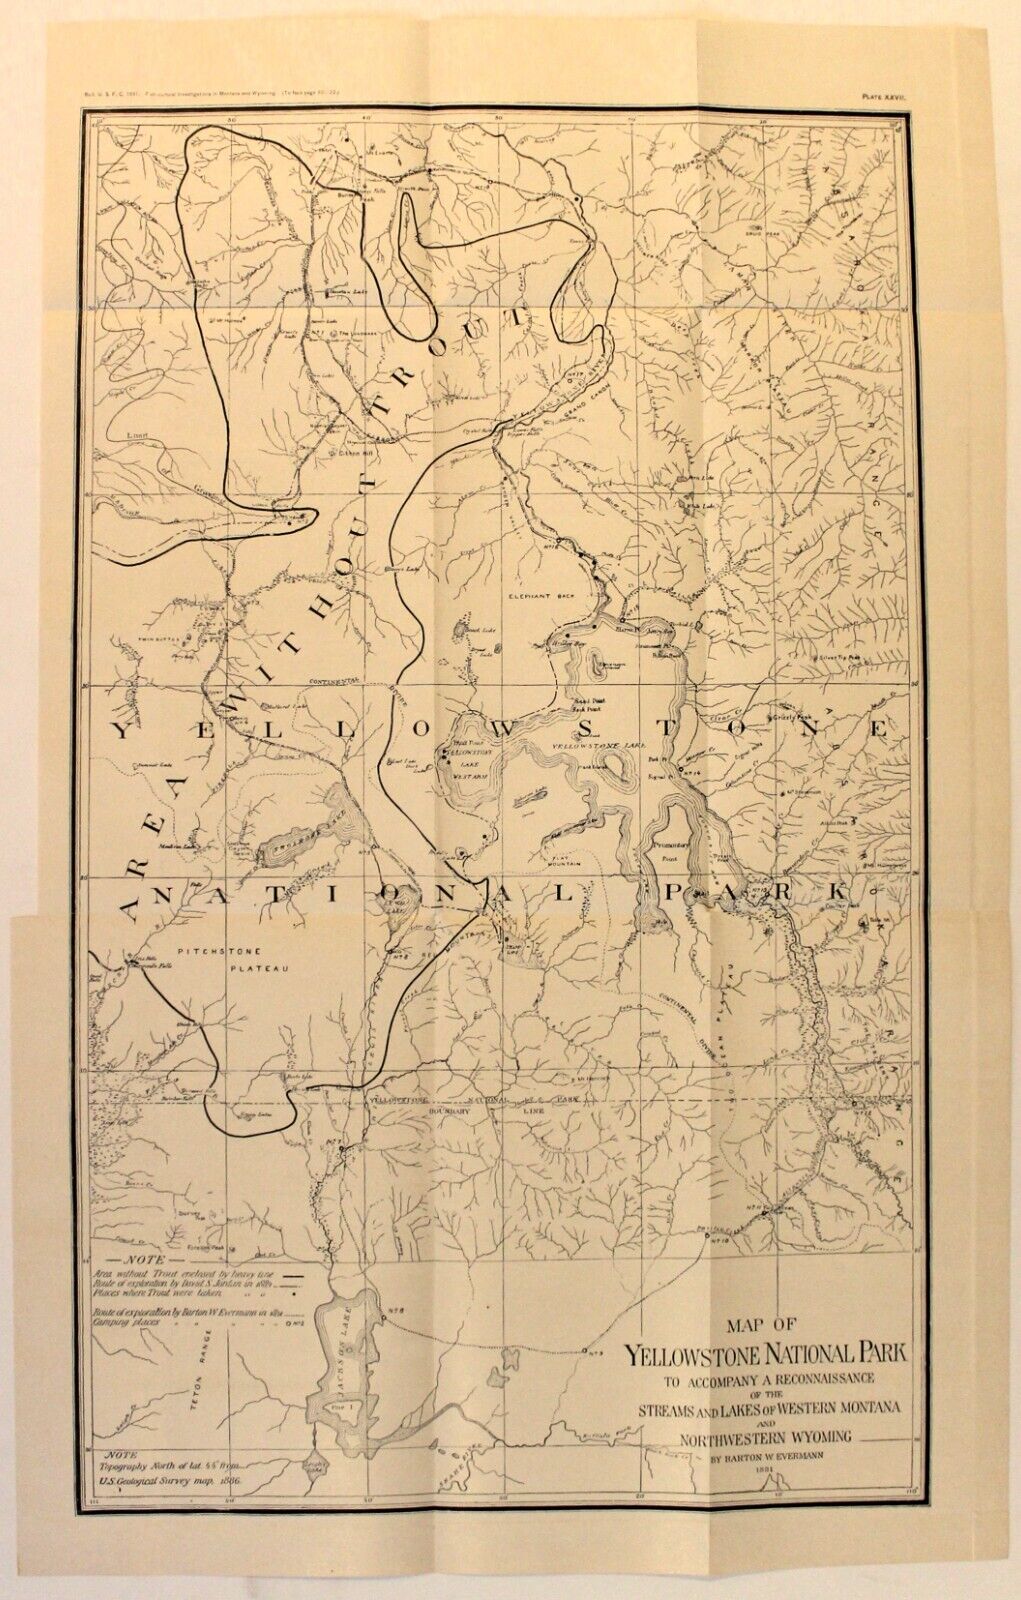 TROUT, YELLOWSTONE NATIONAL PARK, W. MONTANA, N.W. WYOMING Antique map 1891